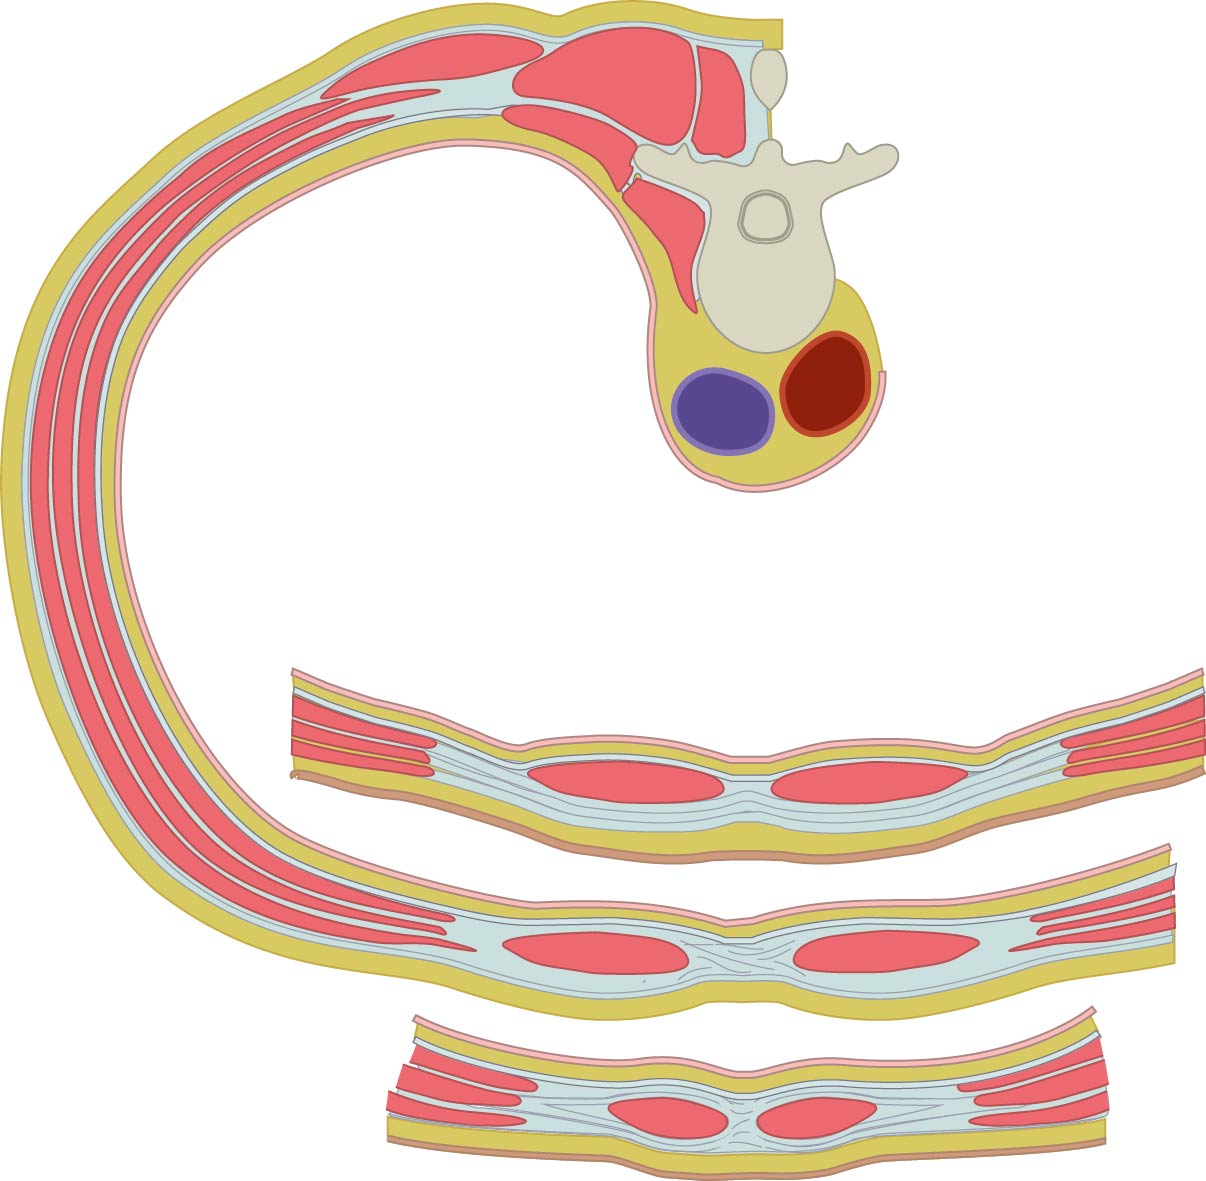 Transverse section of the abdominal wall (section above and below the arcuate line)